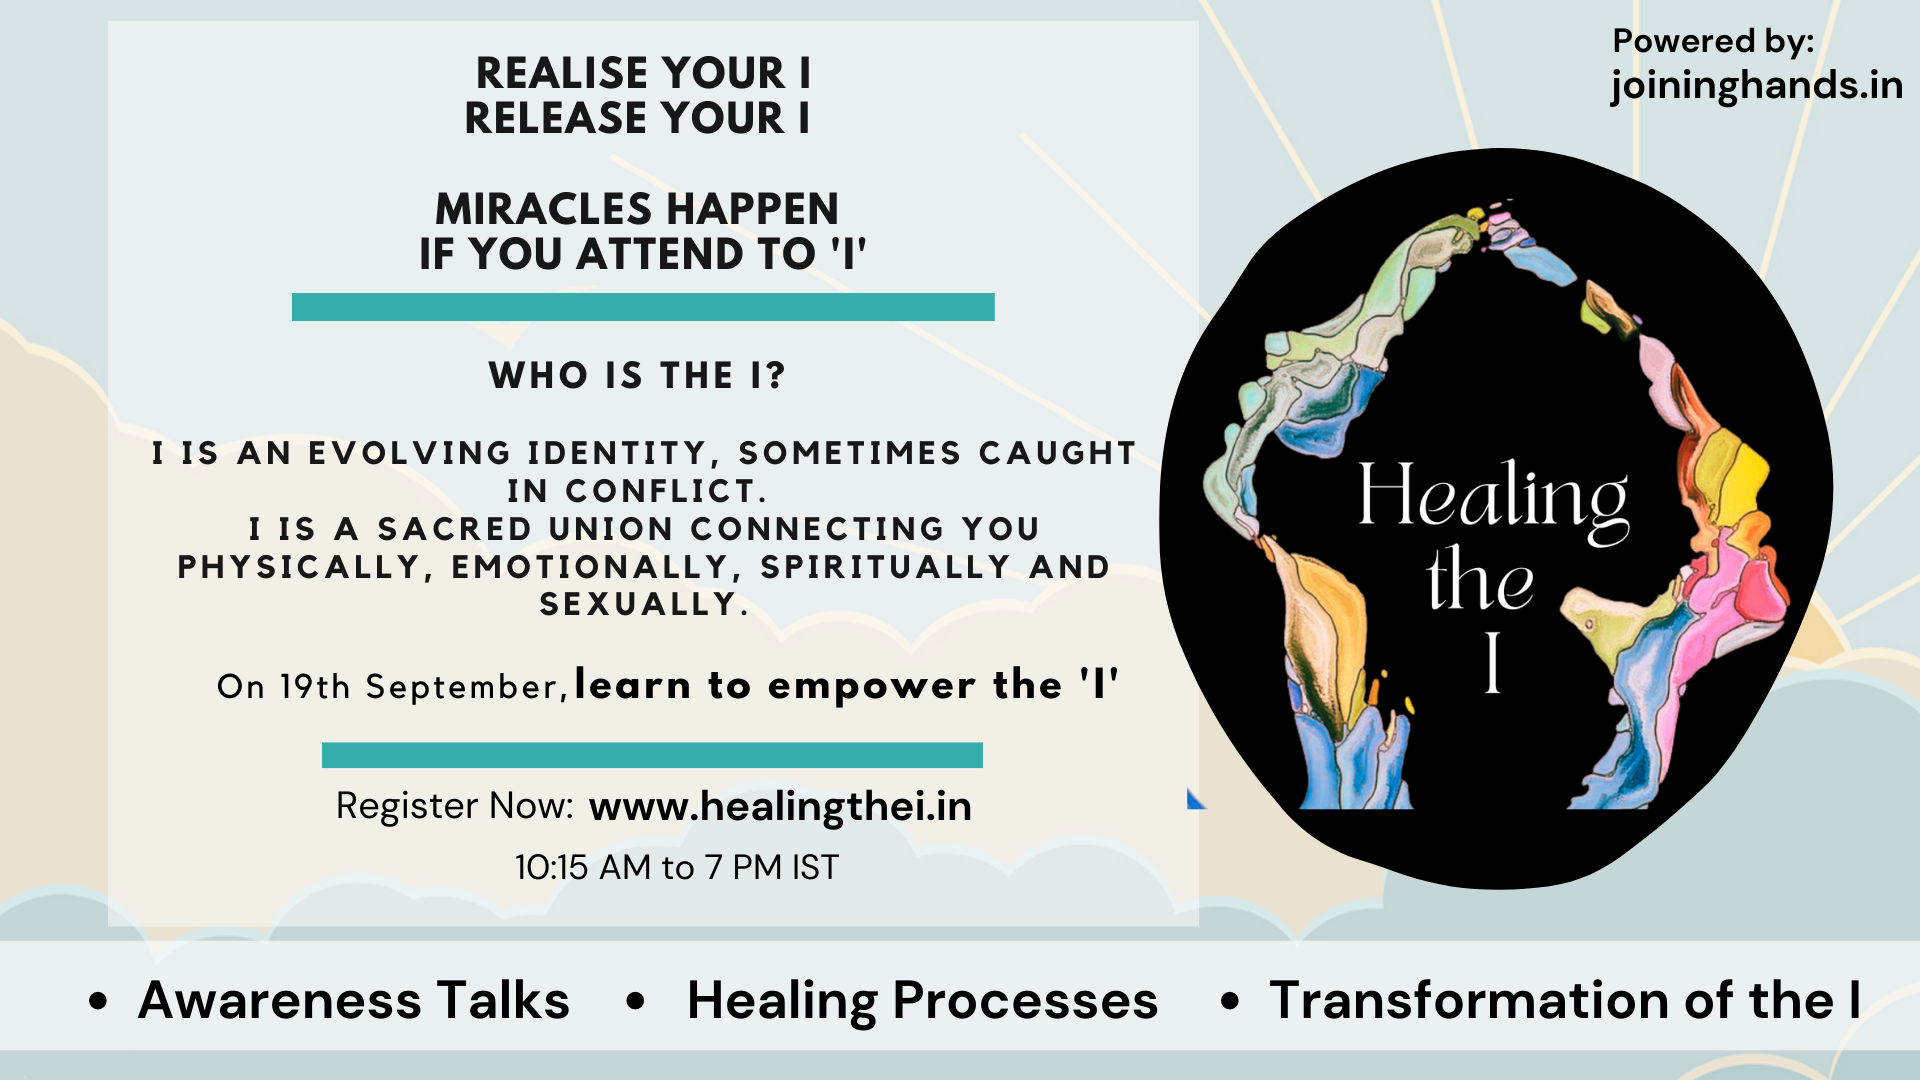 Healing the I : A one-day awareness event, followed by a week of healing workshops, Online Event